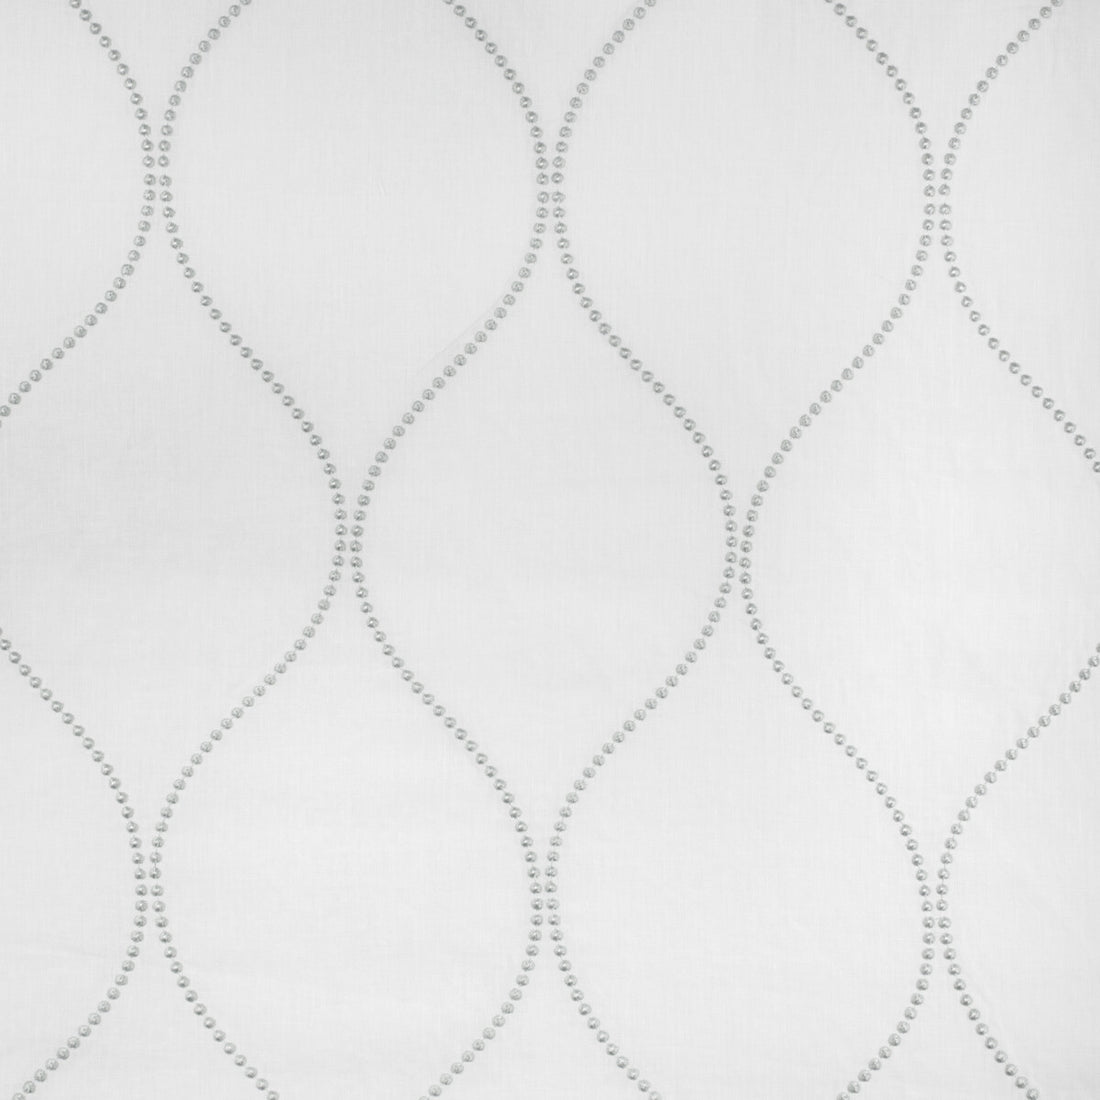 Kiley fabric in silver color - pattern 4201.52.0 - by Kravet Design in the Candice Olson collection